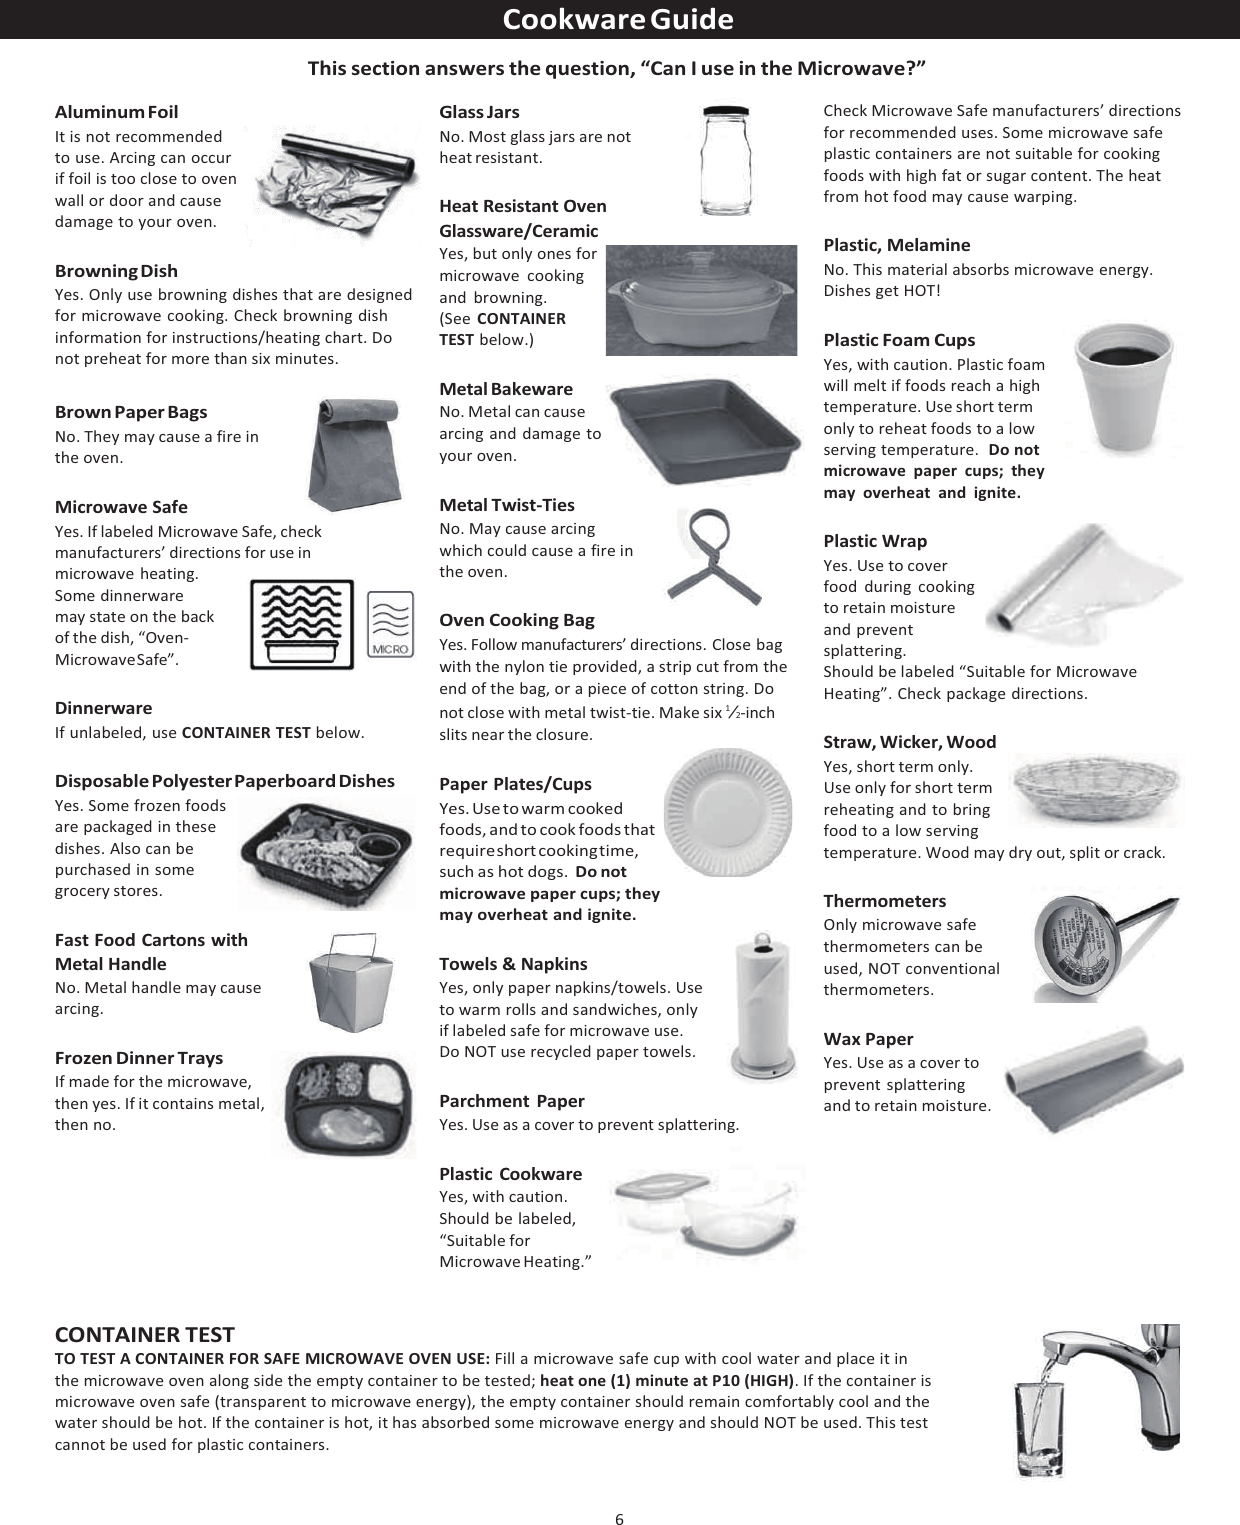 6  Cookware Guide  This section answers the question, “Can I use in the Microwave?” Aluminum Foil It is not recommended to use. Arcing can occur if foil is too close to oven wall or door and cause damage to your oven. Browning Dish Yes. Only use browning dishes that are designed for microwave cooking. Check browning dish information for instructions/heating chart. Do not preheat for more than six minutes. Brown Paper Bags No. They may cause a fire in the oven. Microwave Safe Yes. If labeled Microwave Safe, check manufacturers’ directions for use in microwave heating. Some dinnerware may state on the back of the dish, “Oven- Microwave  Safe”. Dinnerware If unlabeled, use CONTAINER TEST below. Disposable Polyester Paperboard Dishes Yes. Some frozen foods are packaged in these dishes. Also can be purchased in some grocery stores. Fast Food Cartons with Metal Handle No. Metal handle may cause arcing. Frozen Dinner Trays If made for the microwave, then yes. If it contains metal, then no. Glass Jars No. Most glass jars are not heat resistant.  Heat Resistant Oven Glassware/Ceramic Yes, but only ones for microwave cooking and browning. (See CONTAINER TEST below.)  Metal Bakeware No. Metal can cause arcing and damage to your oven.  Metal Twist-Ties No. May cause arcing which could cause a fire in the oven.  Oven Cooking Bag Yes. Follow manufacturers’ directions. Close bag with the nylon tie provided, a strip cut from the end of the bag, or a piece of cotton string. Do not close with metal twist-tie. Make six 1⁄2-inch slits near the closure.  Paper Plates/Cups Yes. Use to warm cooked foods, and to cook foods that require short cooking ti me, such as hot dogs. Do not microwave paper cups; they may overheat and ignite.  Towels &amp; Napkins Yes, only paper napkins/towels. Use to warm rolls and sandwiches, only if labeled safe for microwave use. Do NOT use recycled paper towels.  Parchment Paper Yes. Use as a cover to prevent splattering.  Plastic Cookware Yes, with caution. Should be labeled, “Suitable for Microwave Heating.” Check Microwave Safe manufacturers’ directions for recommended uses. Some microwave safe plastic containers are not suitable for cooking foods with high fat or sugar content. The heat from hot food may cause warping.  Plastic, Melamine No. This material absorbs microwave energy. Dishes get HOT!  Plastic Foam Cups Yes, with caution. Plastic foam will melt if foods reach a high temperature. Use short term only to reheat foods to a low serving temperature.  Do not microwave paper cups; they may overheat and ignite.  Plastic Wrap Yes. Use to cover food during cooking to retain moisture and prevent splattering. Should be labeled “Suitable for Microwave Heating”. Check package directions.  Straw, Wicker, Wood Yes, short term only. Use only for short term reheating and to bring food to a low serving temperature. Wood may dry out, split or crack.  Thermometers Only microwave safe thermometers can be used, NOT conventional thermometers.  Wax Paper Yes. Use as a cover to prevent splattering and to retain moisture. CONTAINER TEST TO TEST A CONTAINER FOR SAFE MICROWAVE OVEN USE: Fill a microwave safe cup with cool water and place it in  the microwave oven along side the empty container to be tested; heat one (1) minute at P10 (HIGH). If the container is microwave oven safe (transparent to microwave energy), the empty container should remain comfortably cool and the water should be hot. If the container is hot, it has absorbed some microwave energy and should NOT be used. This test cannot be used for plastic containers. 